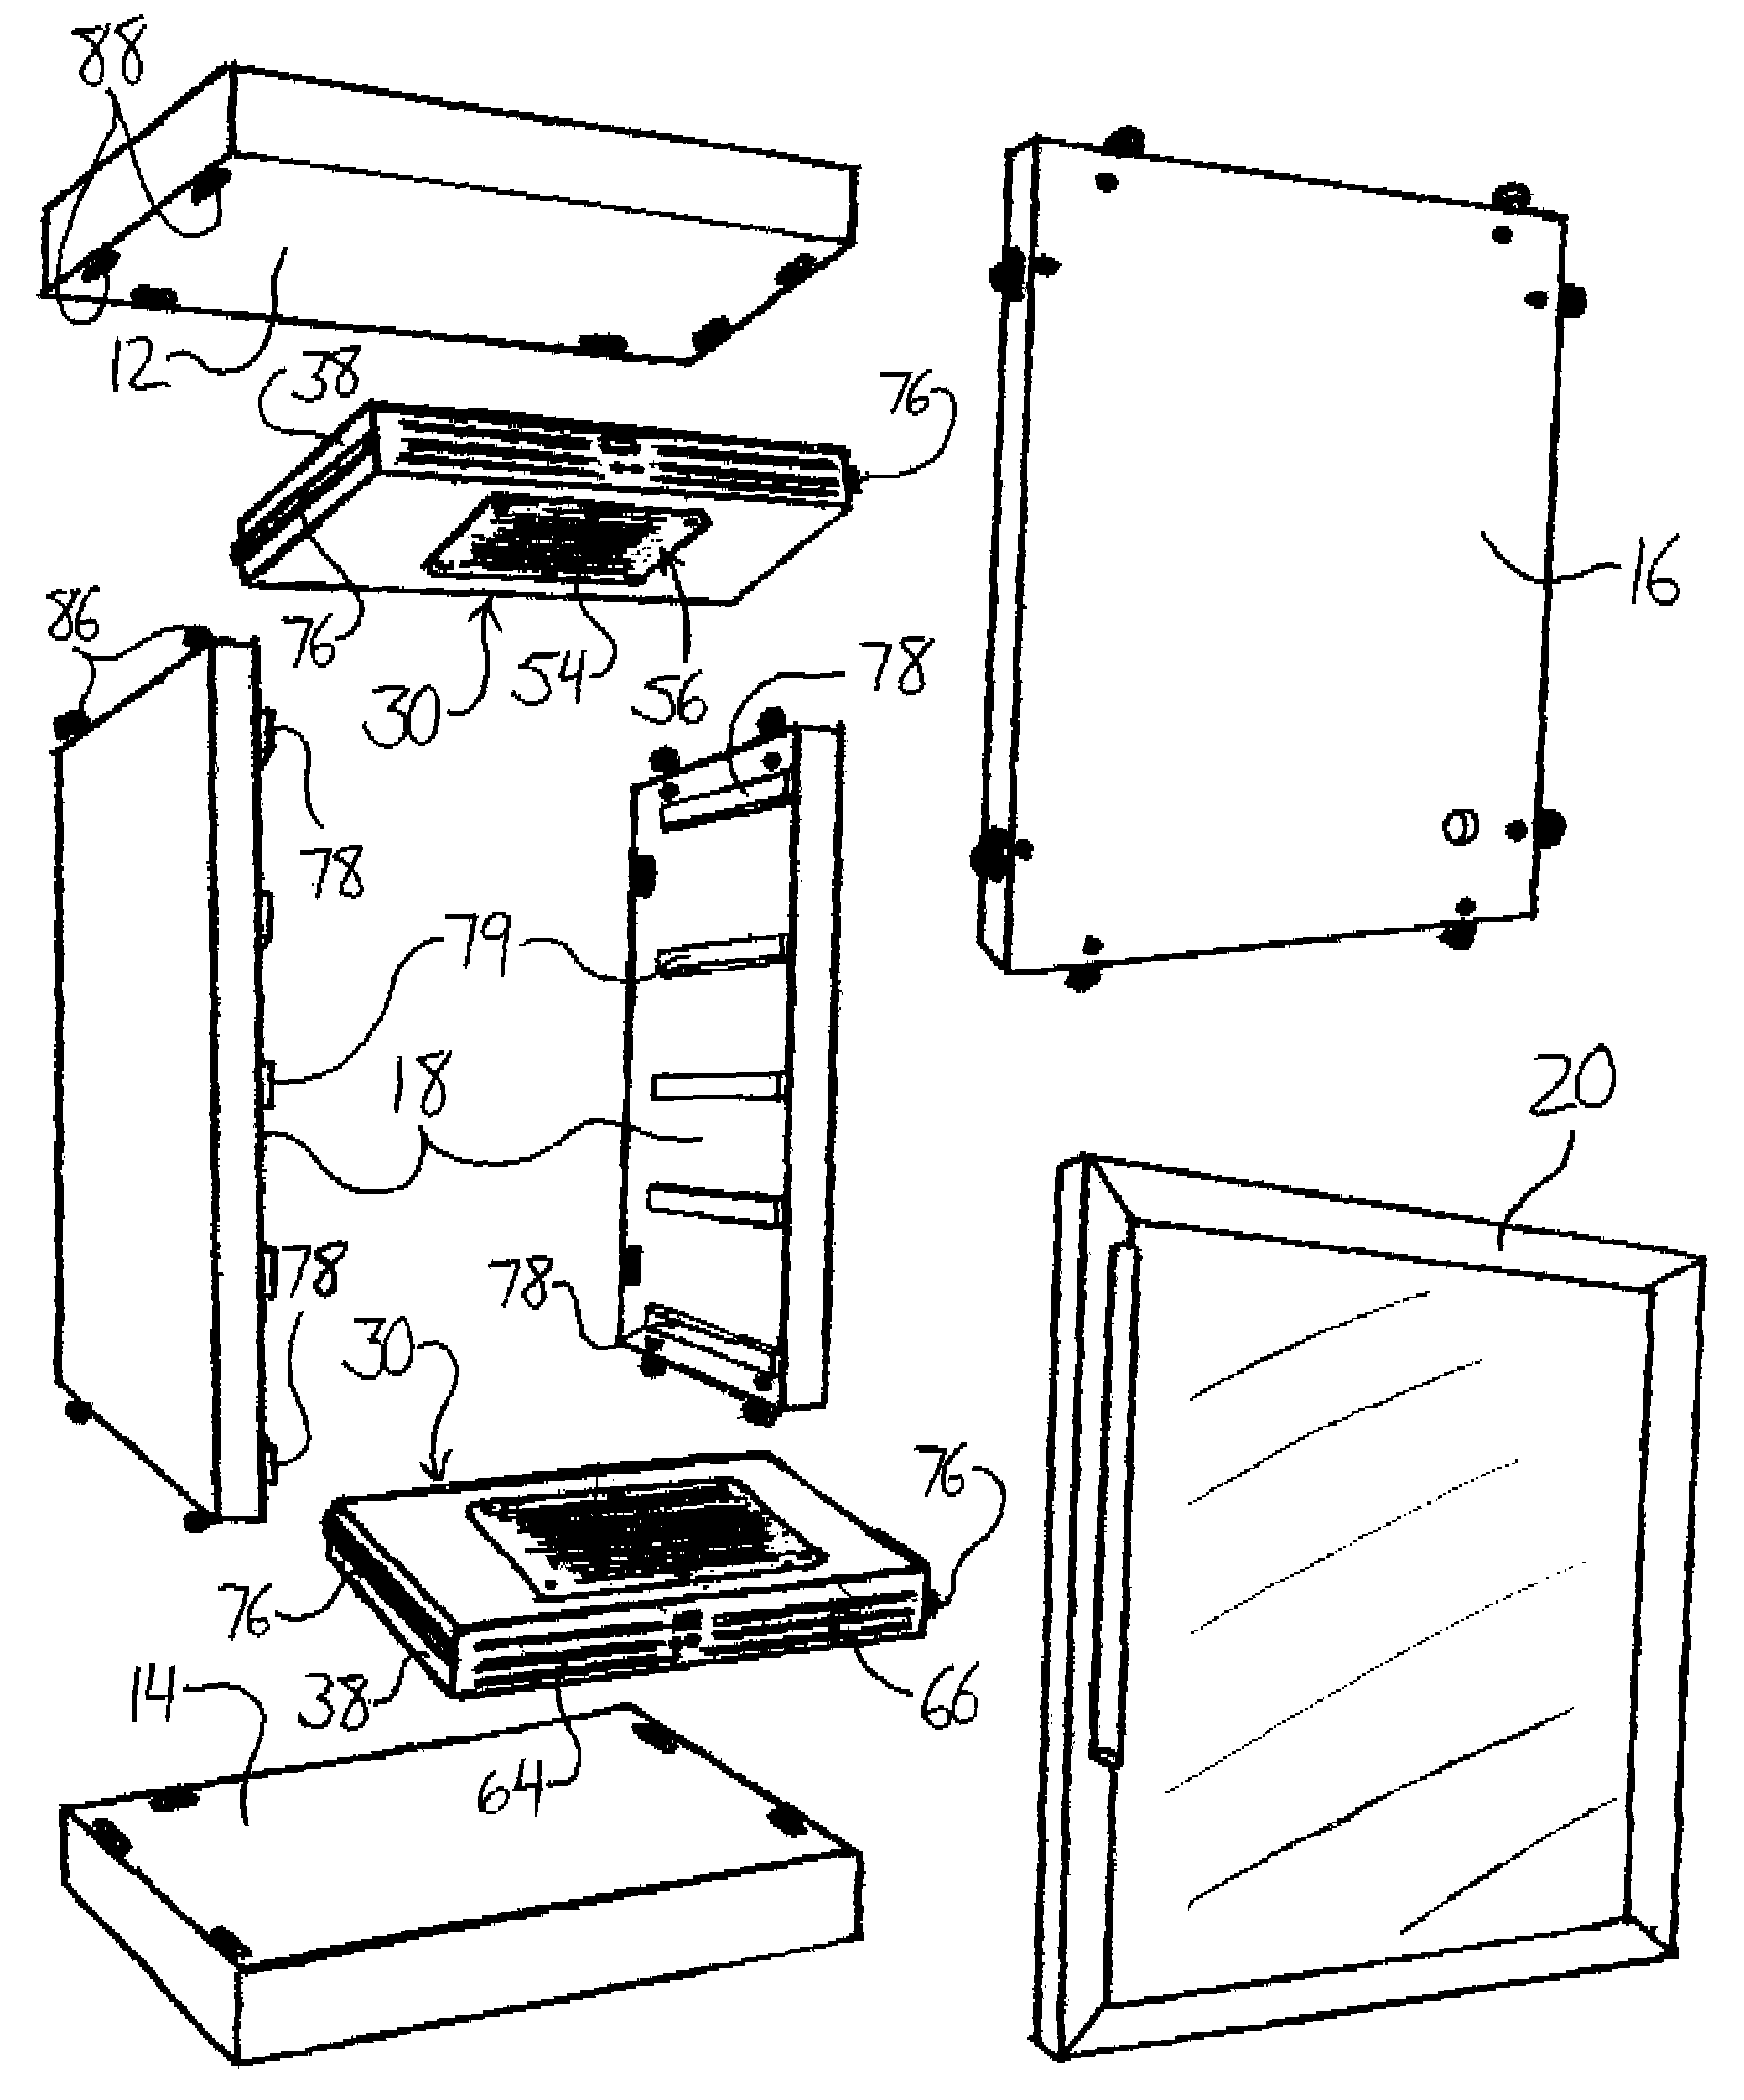 Refrigerated cabinet and cooling module for same